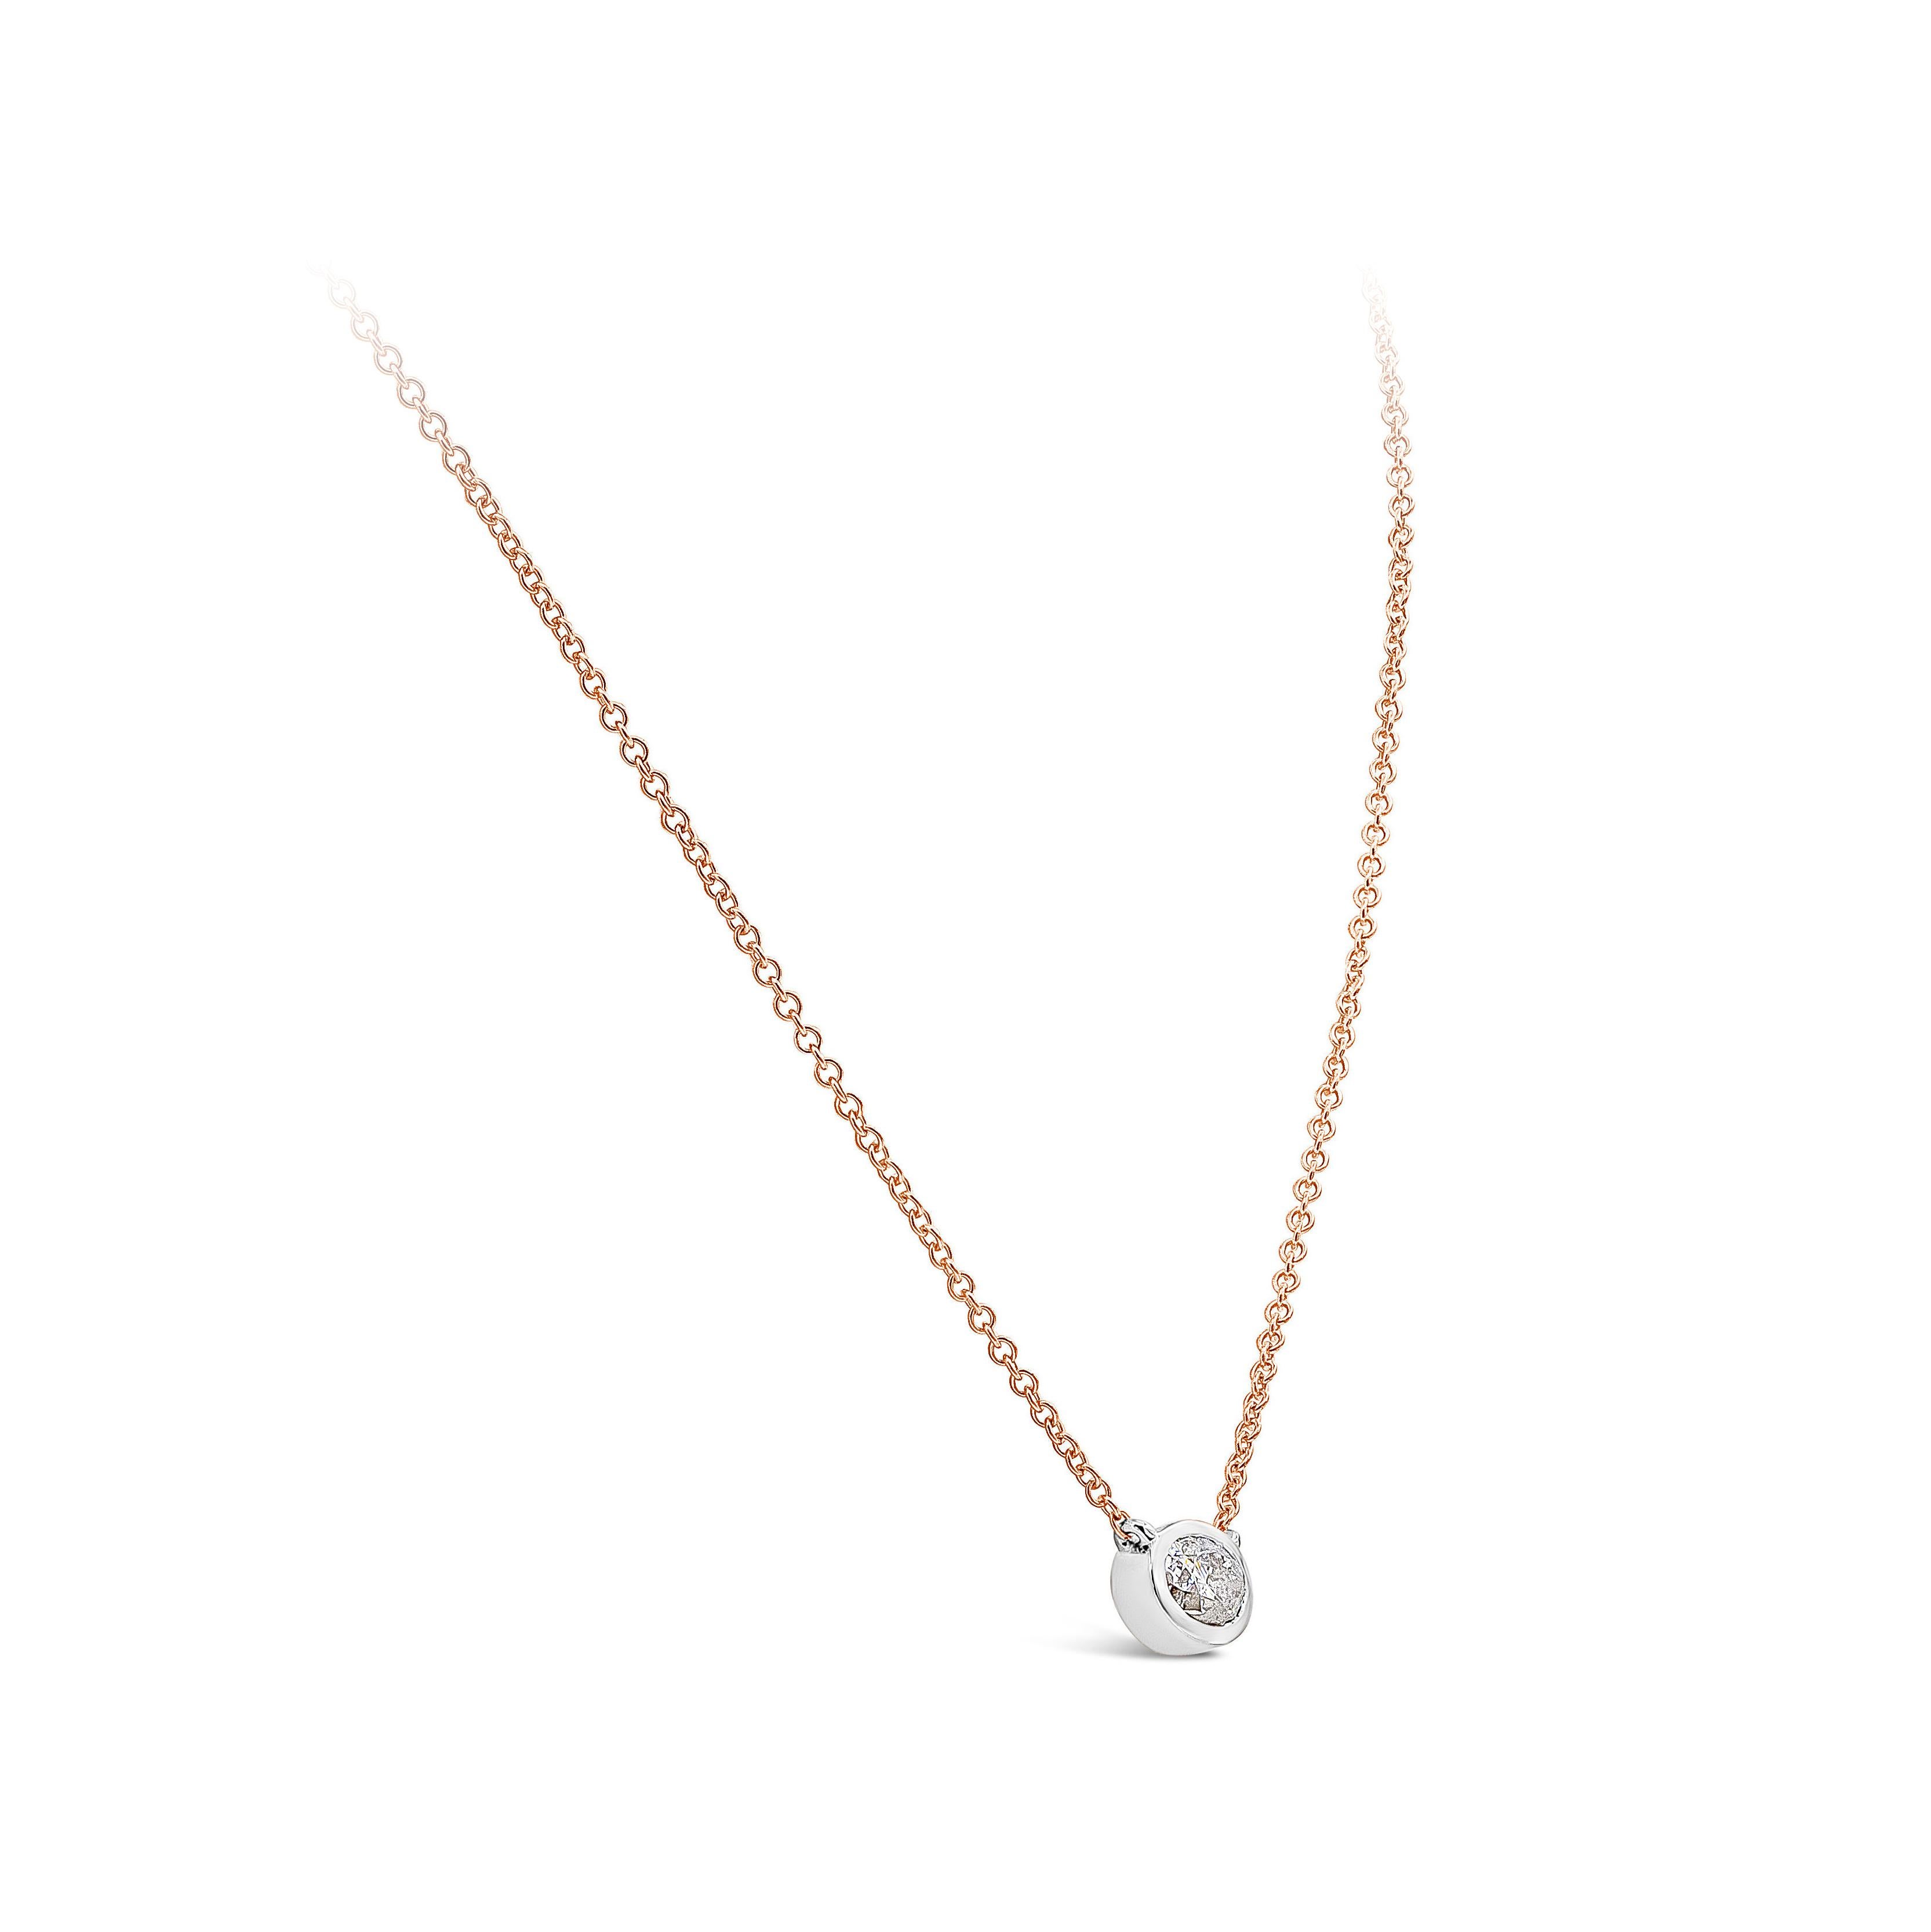 A simple pendant necklace showcasing a GIA Certified 1.03 carat oval cut diamond, I Color and I2 in Clarity. Set in 14K White Gold Bezel, suspended on a 16 inch 14K rose gold chain. 16 inches in Length. 

Style available in different price ranges.